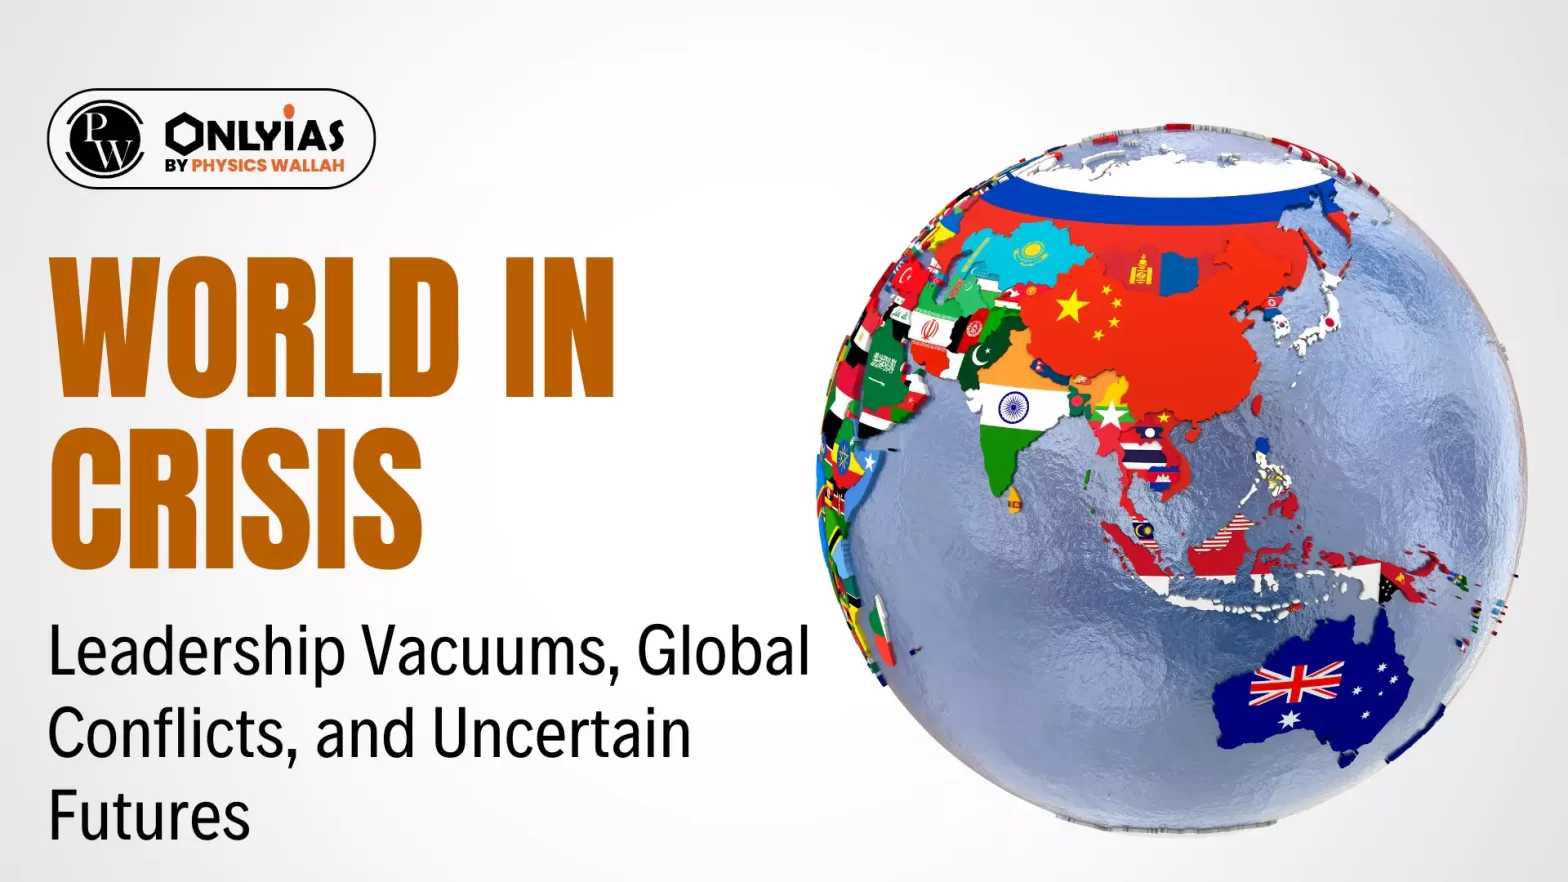 World in Crisis: Leadership Vacuums, Global Conflicts, and Uncertain Futures